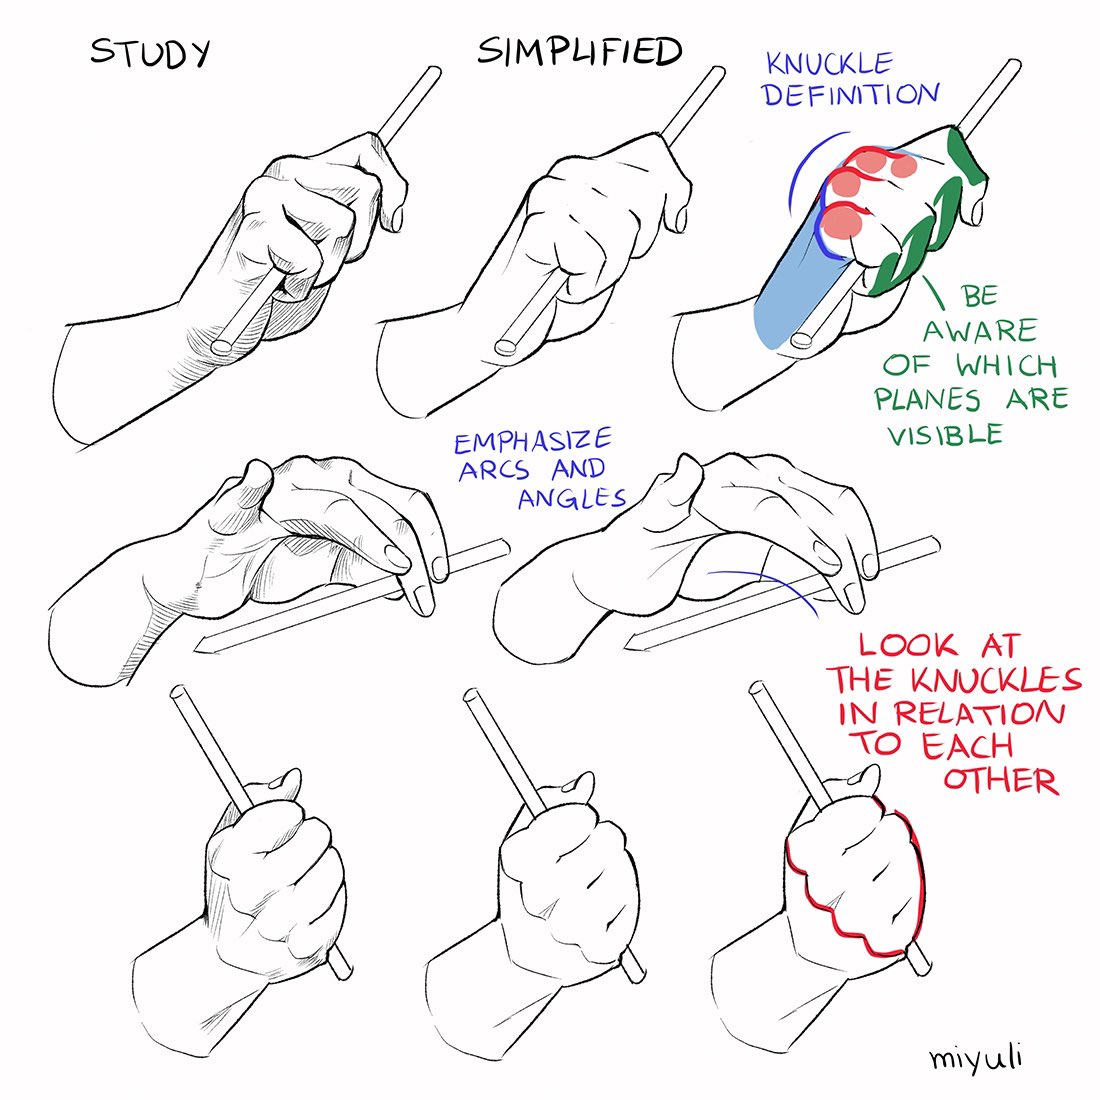 #XPPenTutorial 💚

HAND DRAWING NOTES by the talented @miyuliart! it's often the tiny details that make all the difference!🔥🔥

#howtodraw #art #artist #arthelp #arttips #illustration #anime #drawing